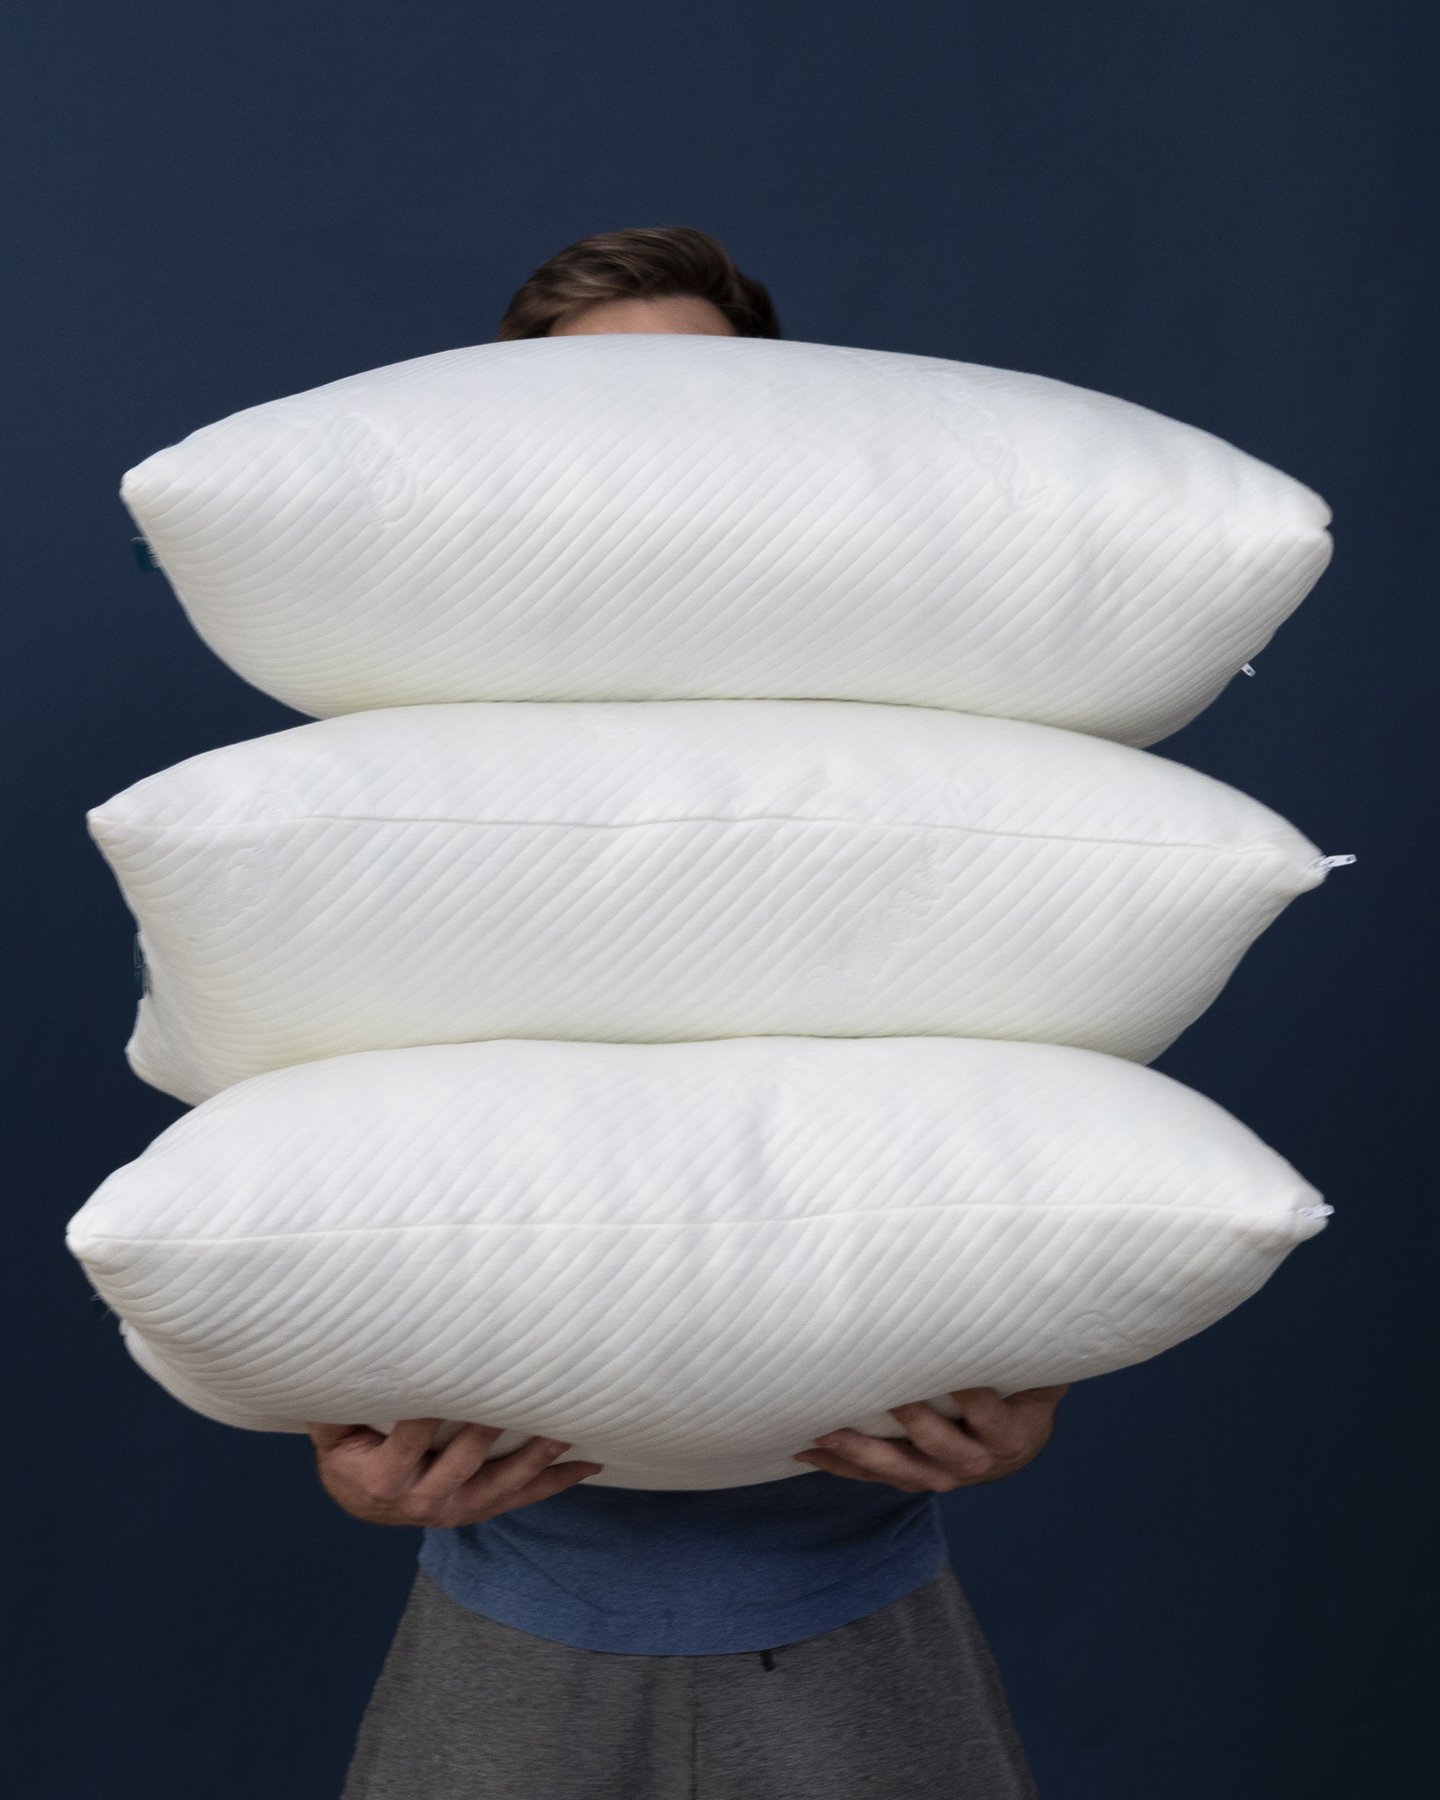 care instruction for washing your cannabidiol infused pillow